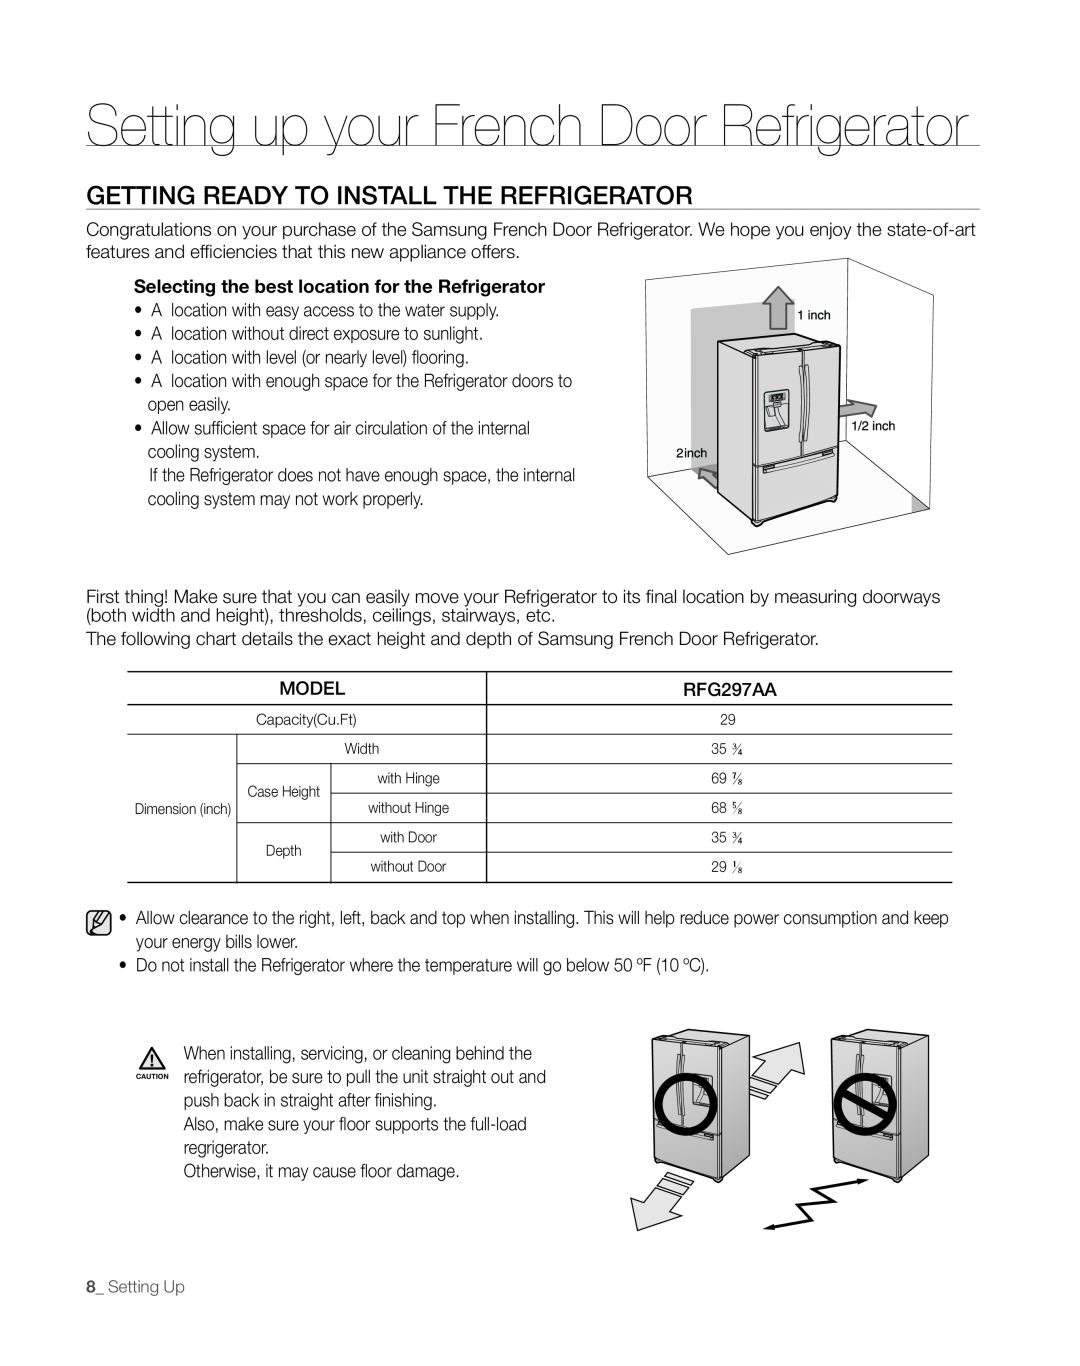 Sears RFG297AA manual Setting up your French Door Refrigerator, GEttinG READy to instALL tHE REFRiGERAtoR 